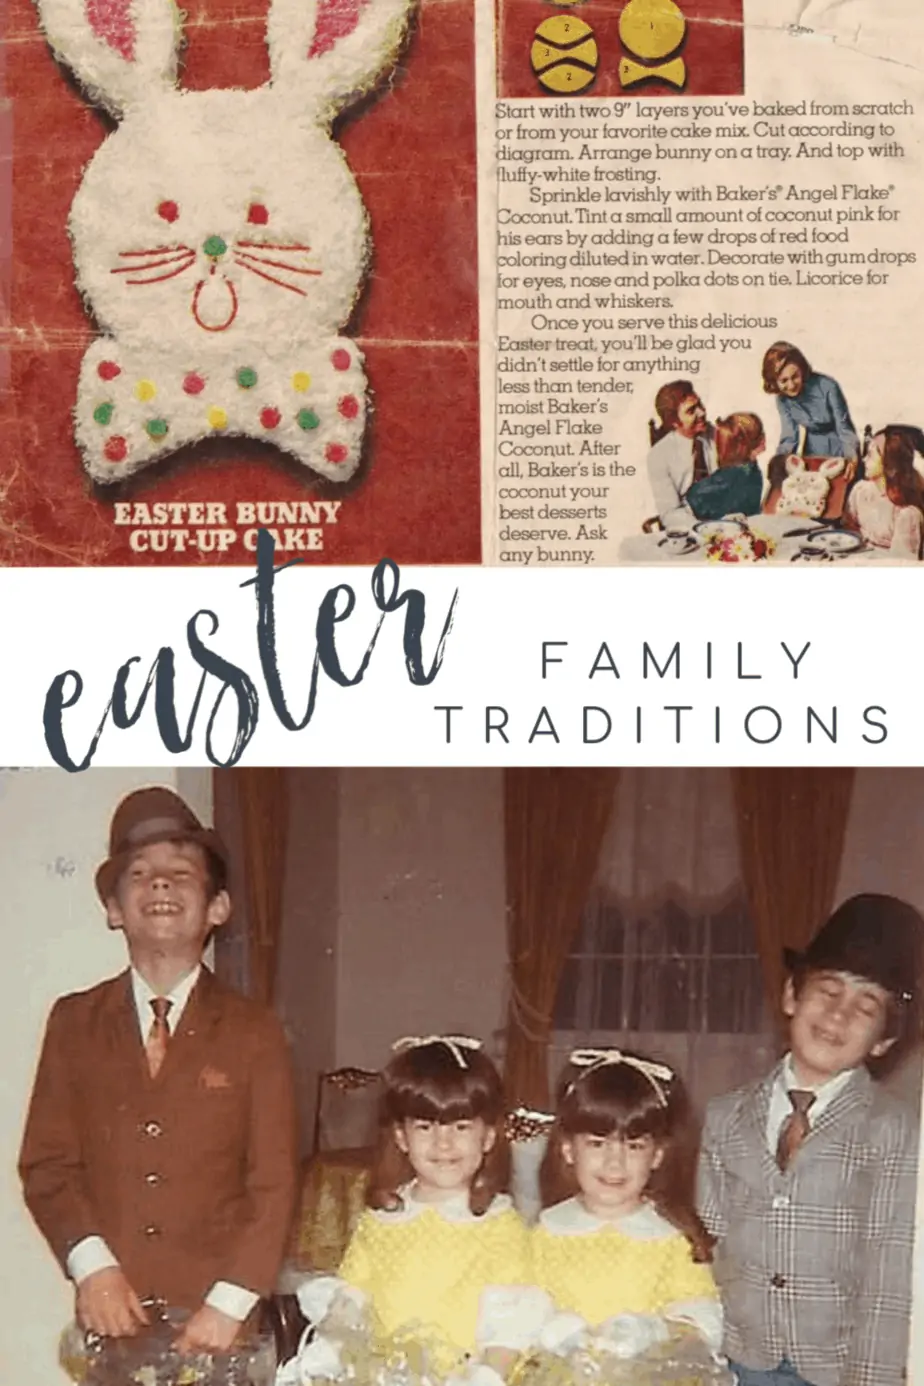 Fun Easter Traditions & Projects For the Entire Family